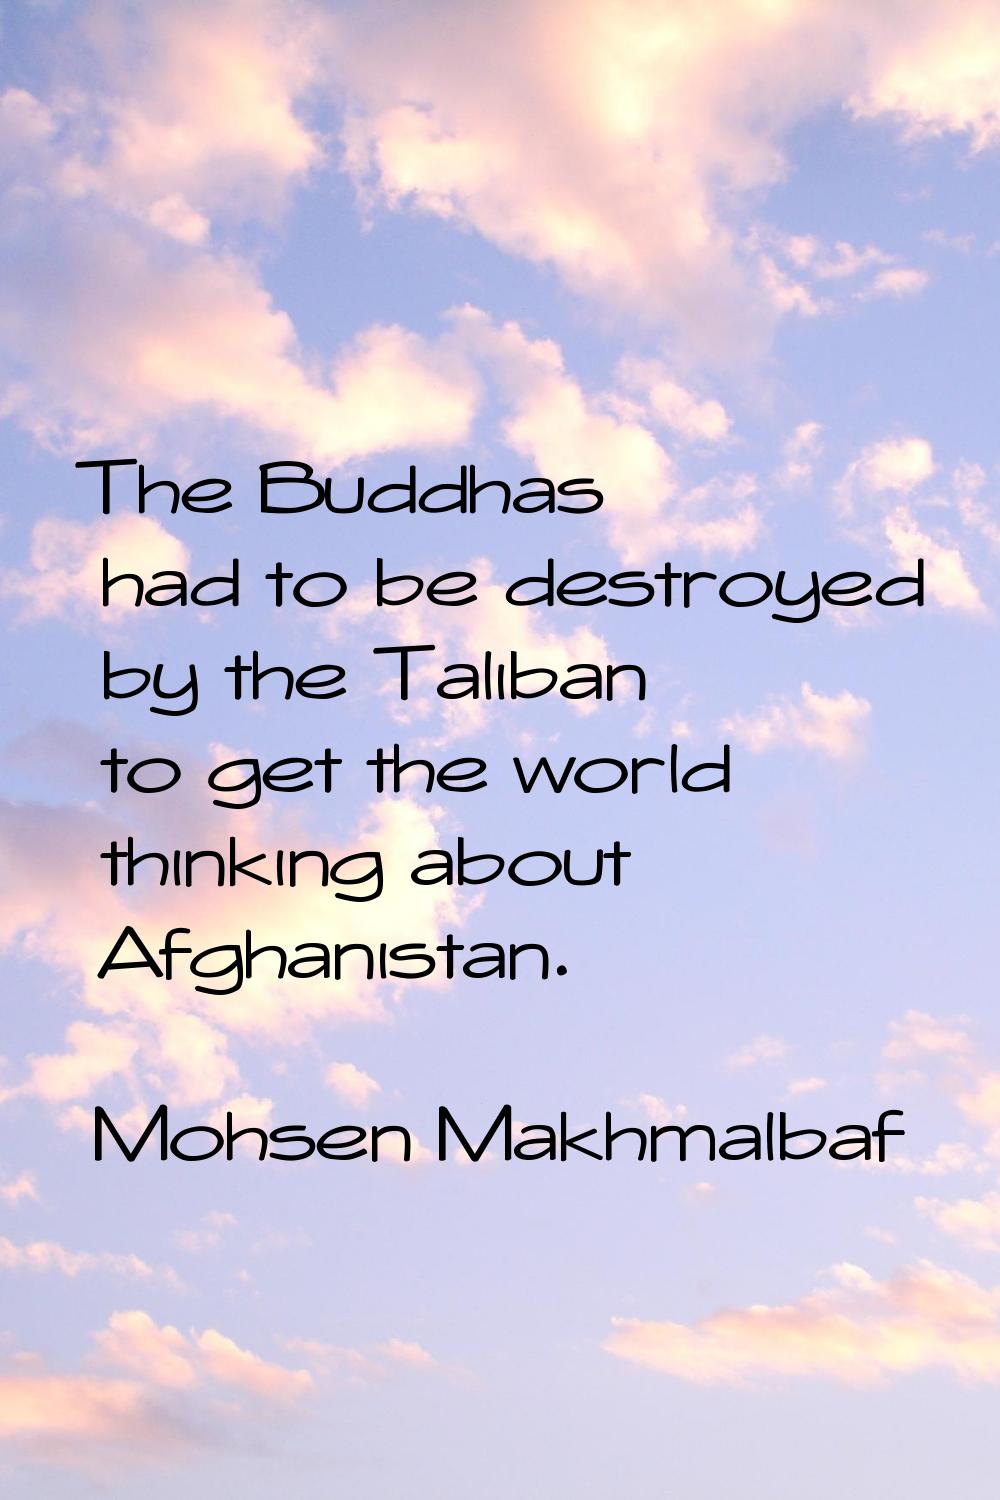 The Buddhas had to be destroyed by the Taliban to get the world thinking about Afghanistan.